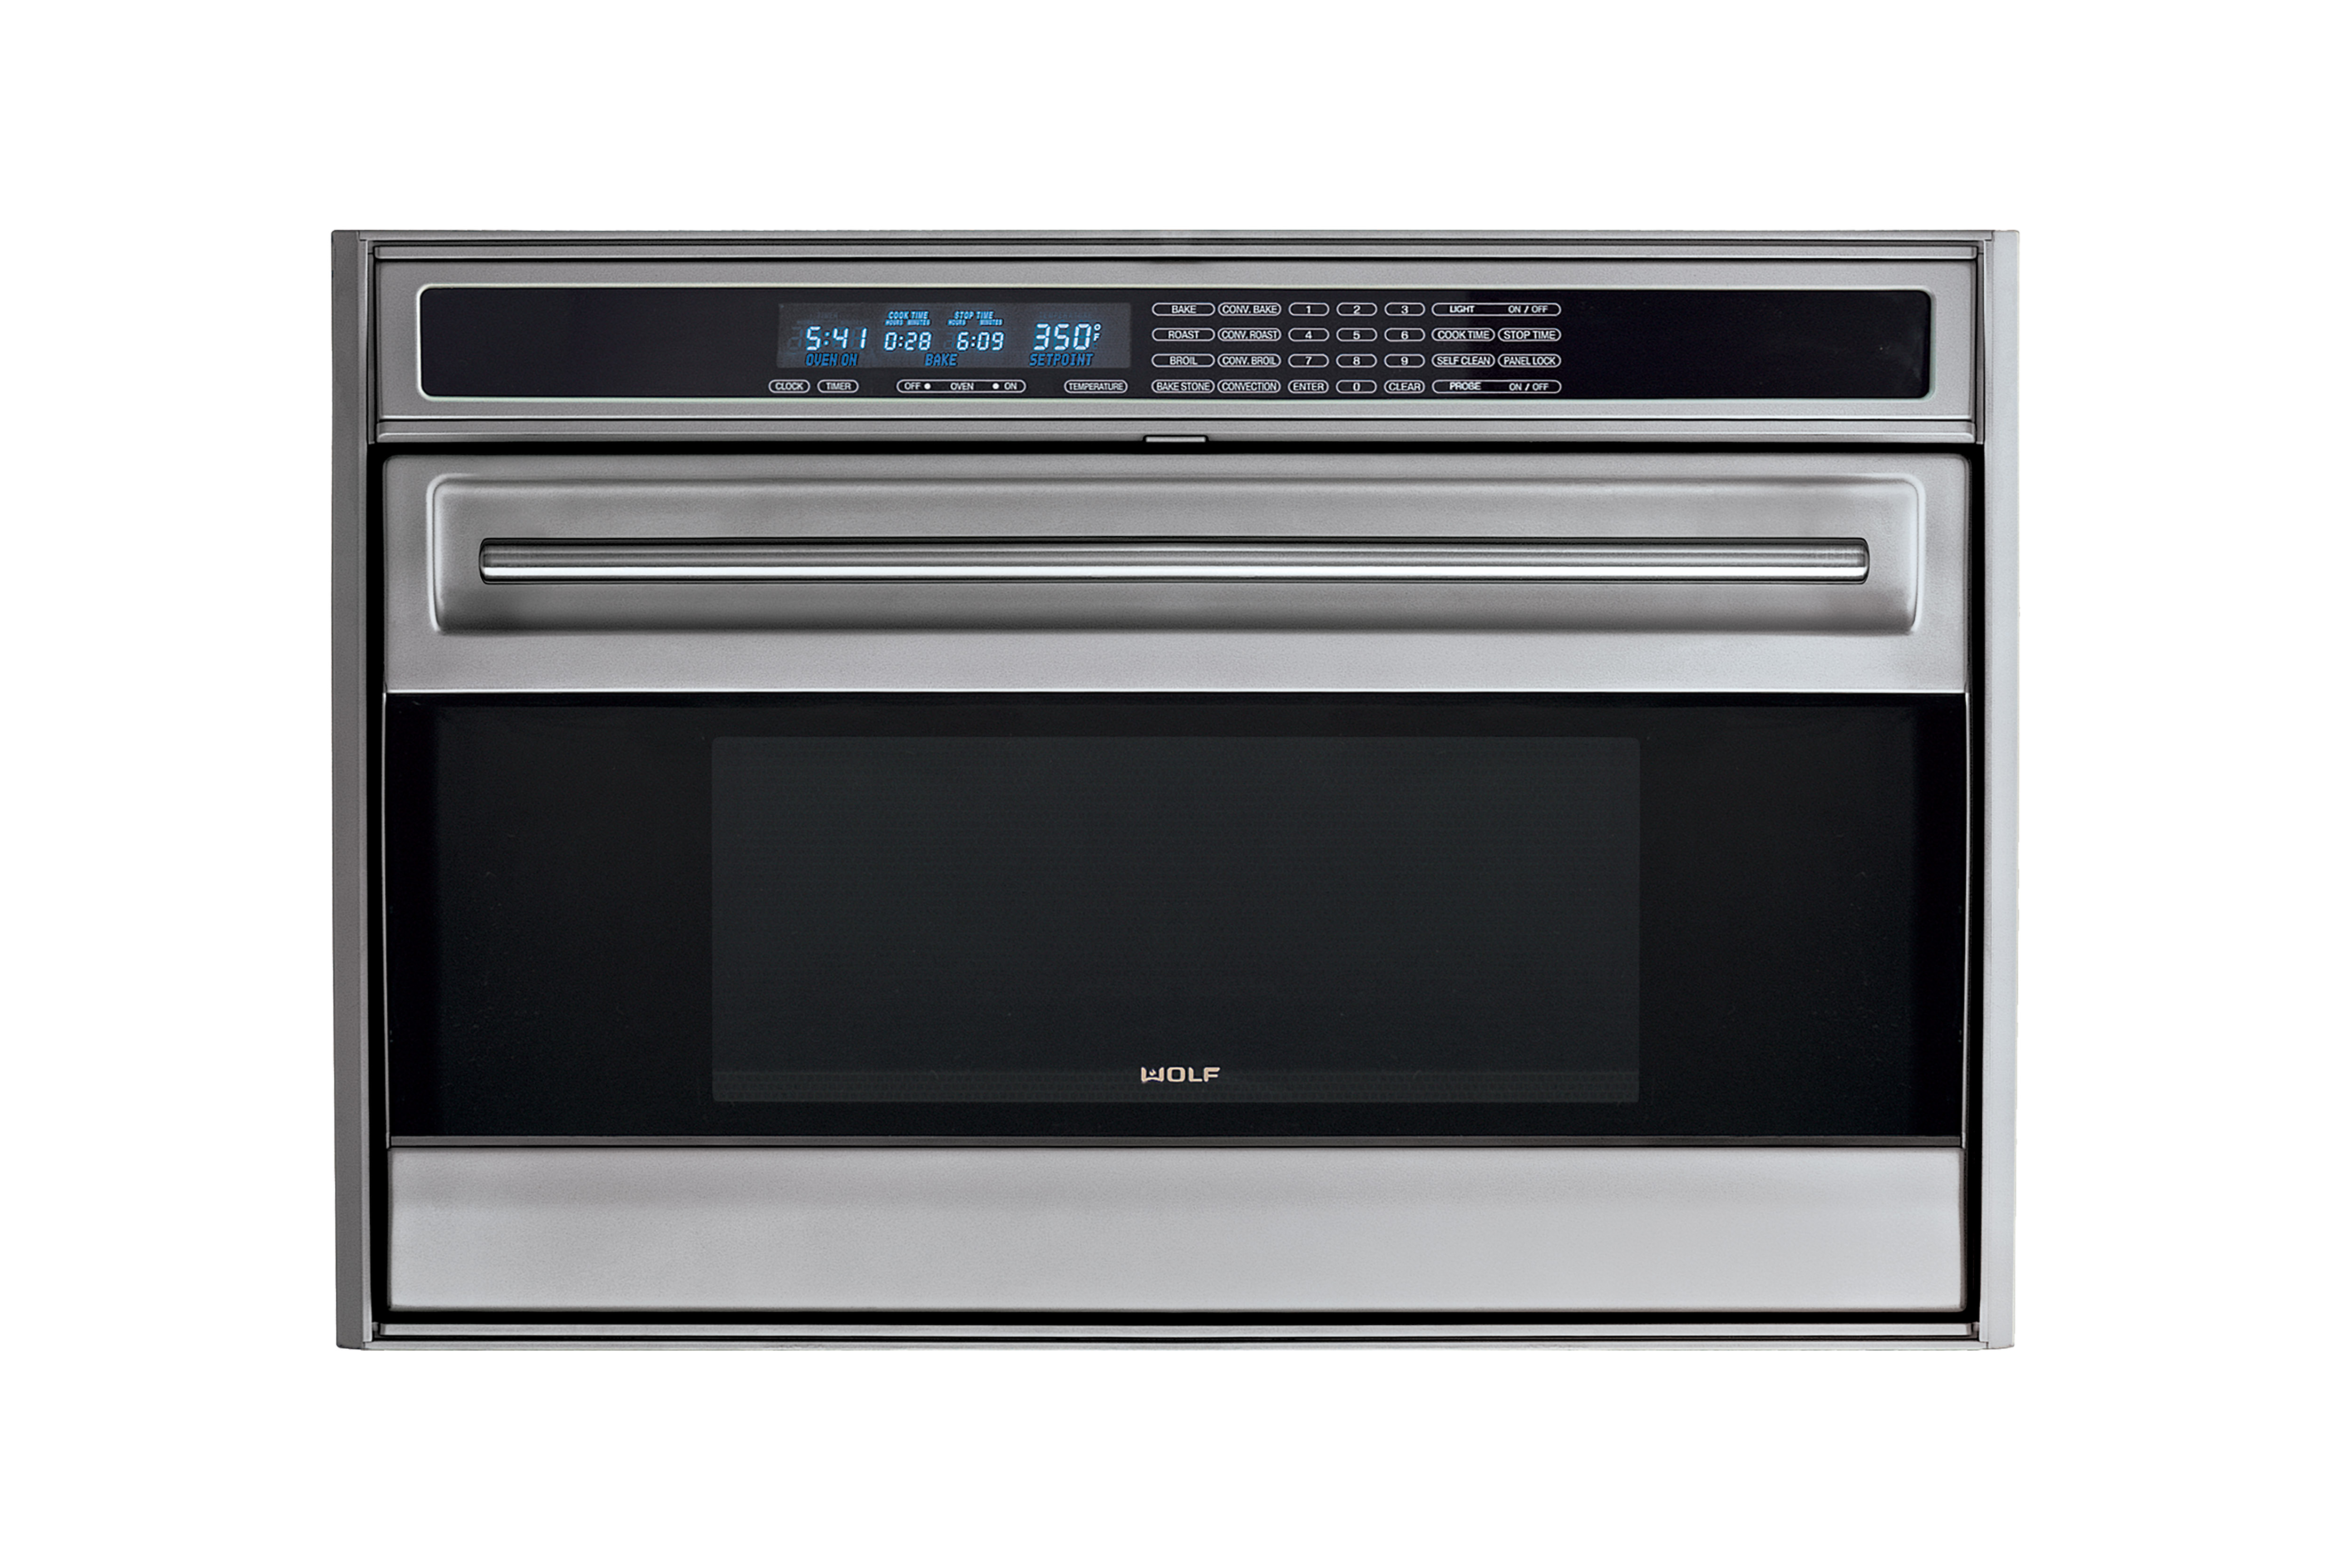 Electric ovens with steam фото 49